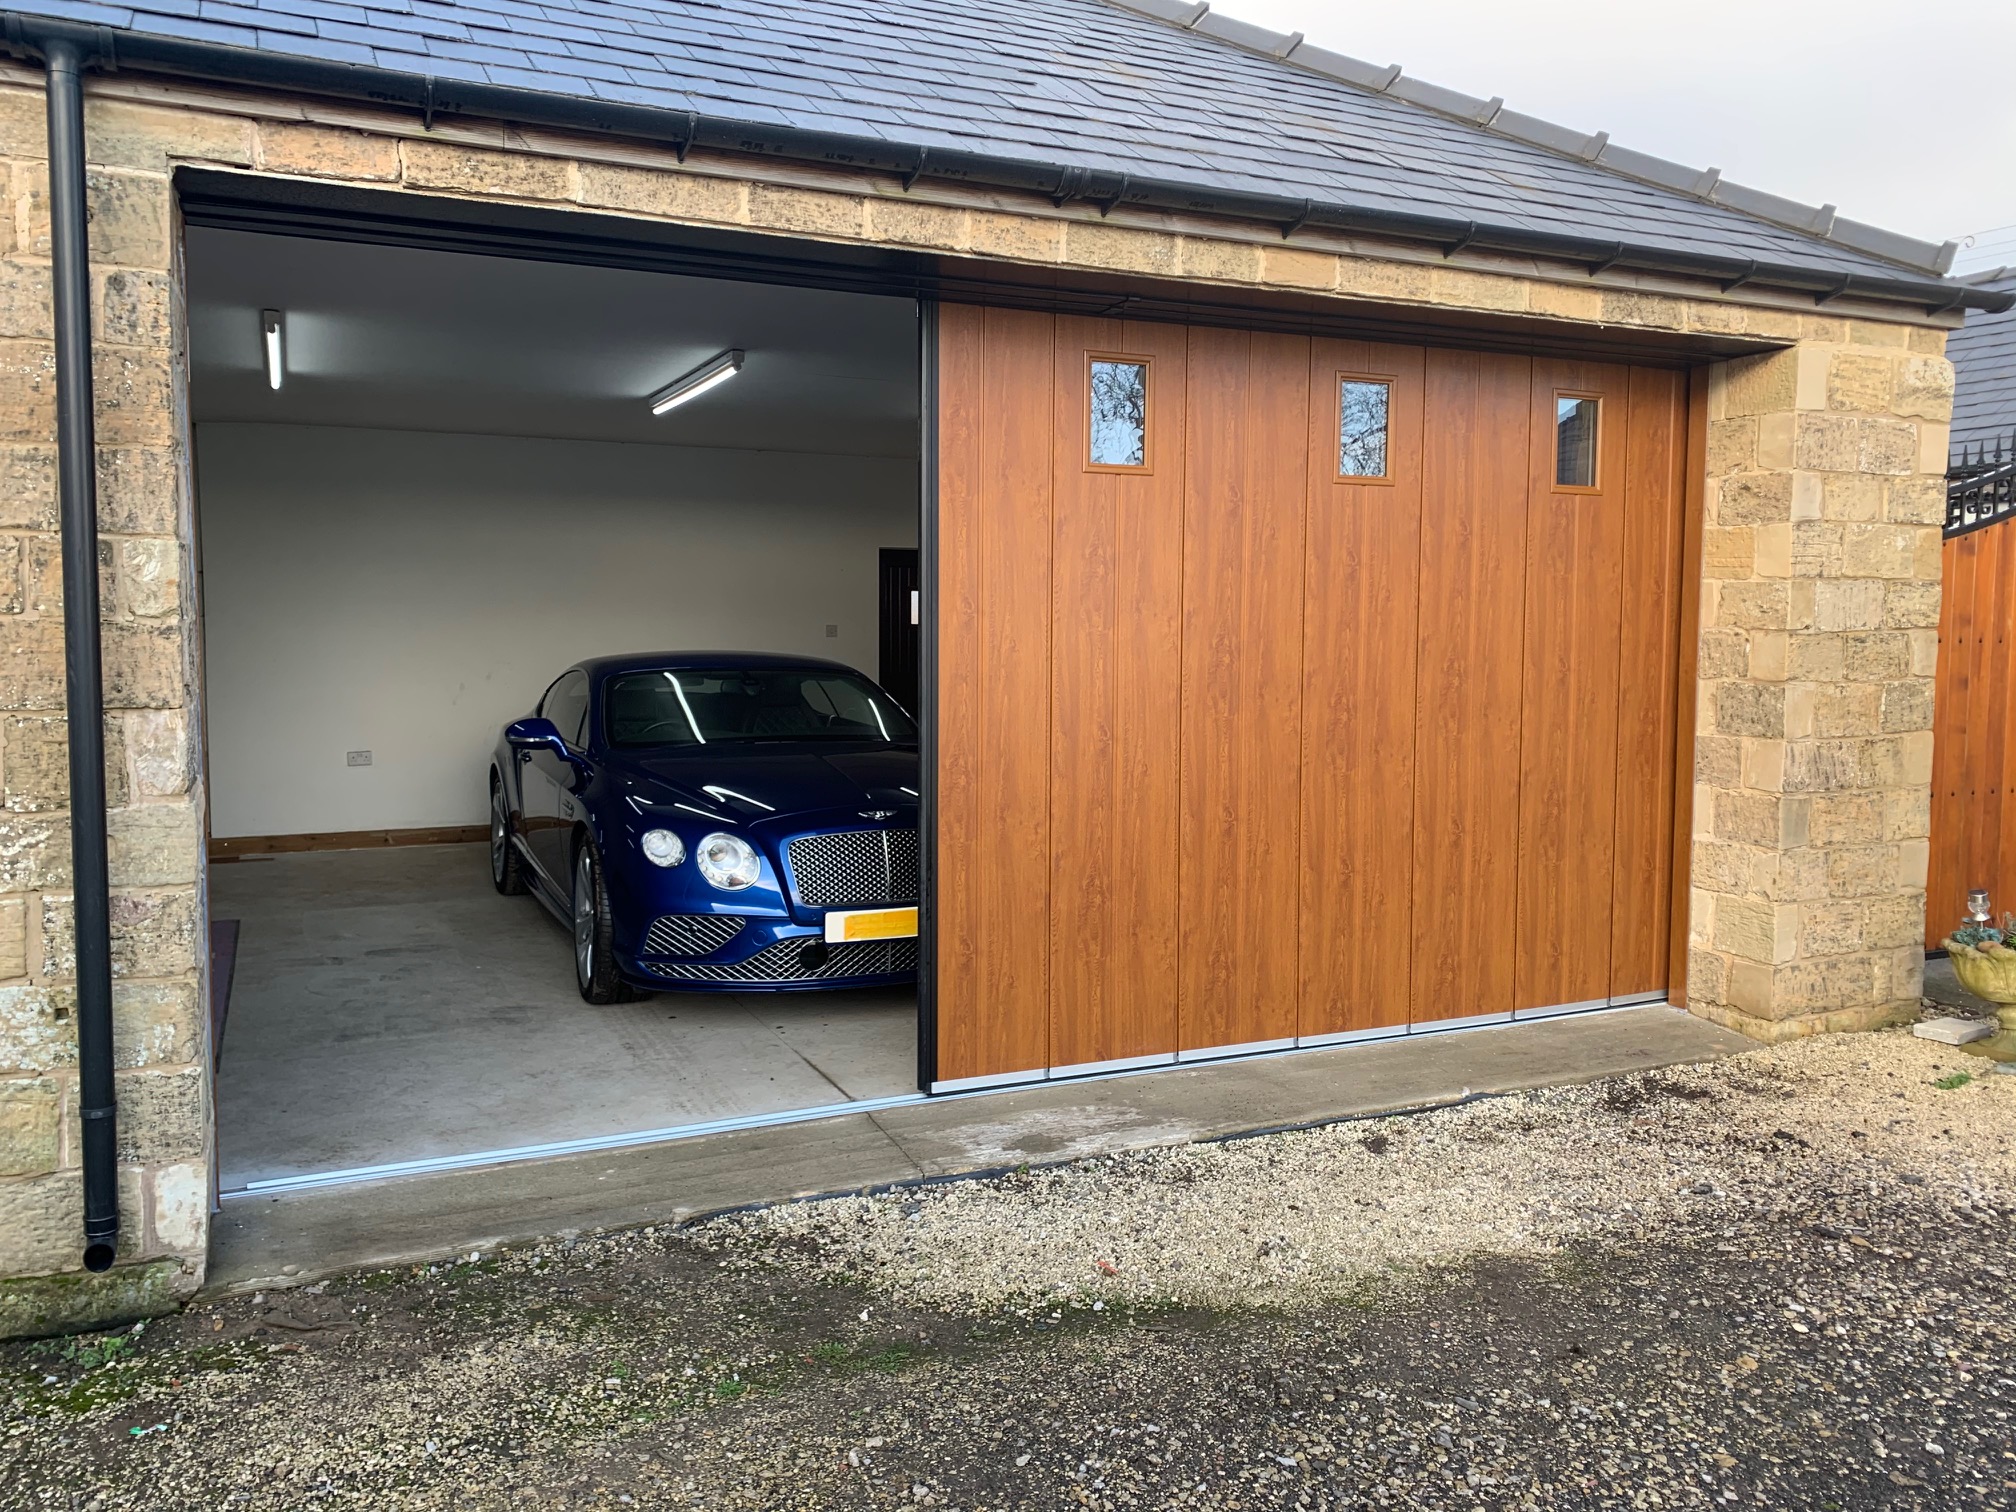 What Are the Best Uses for a Garage